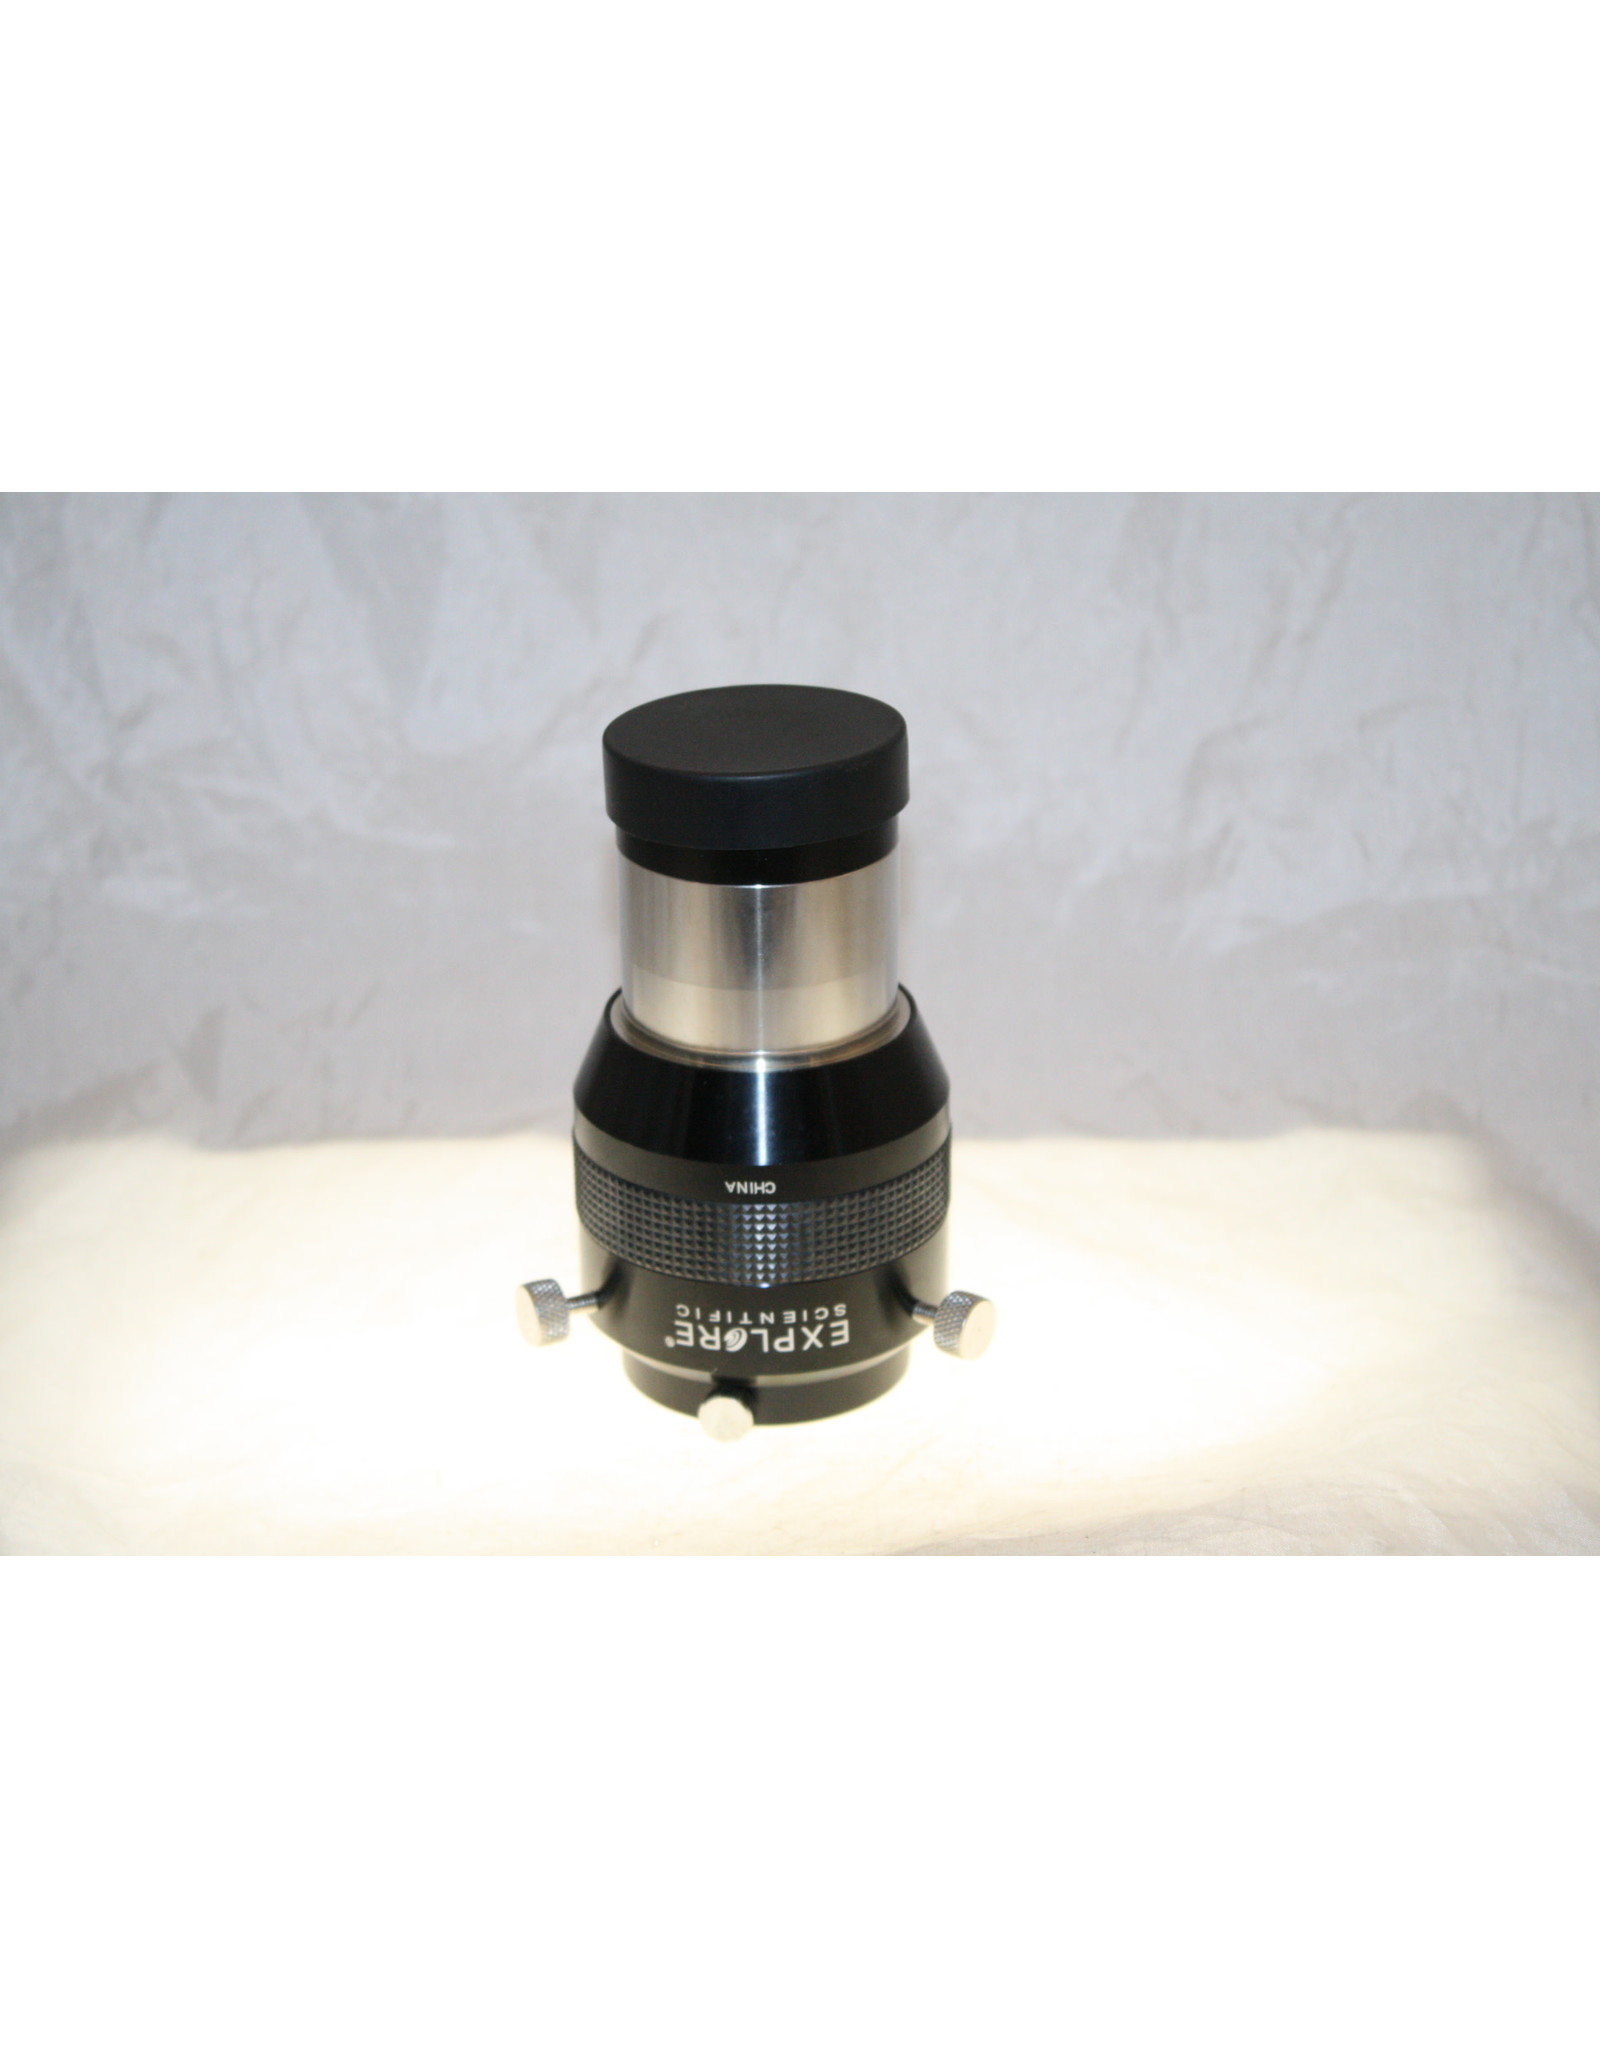 Explore Scientific Explore Scientific 2x Focal Extender; 2.0-inch O.D. Barrel with 1.25-inch O.D. Adapter (Pre-0wned)